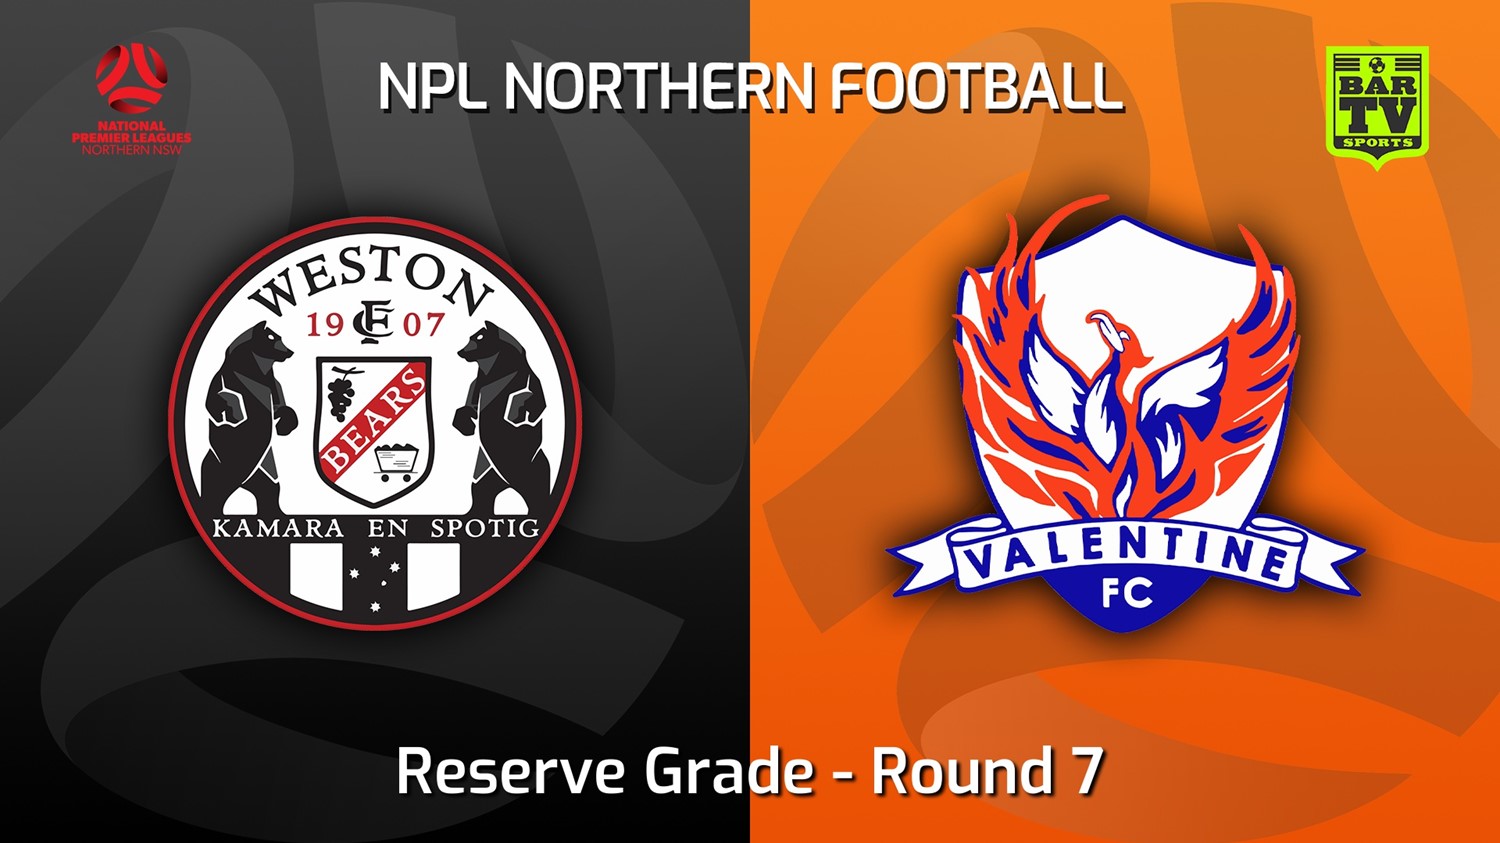 220424-NNSW NPLM Res Round 7 - Weston Workers FC Res v Valentine Phoenix FC Res Slate Image